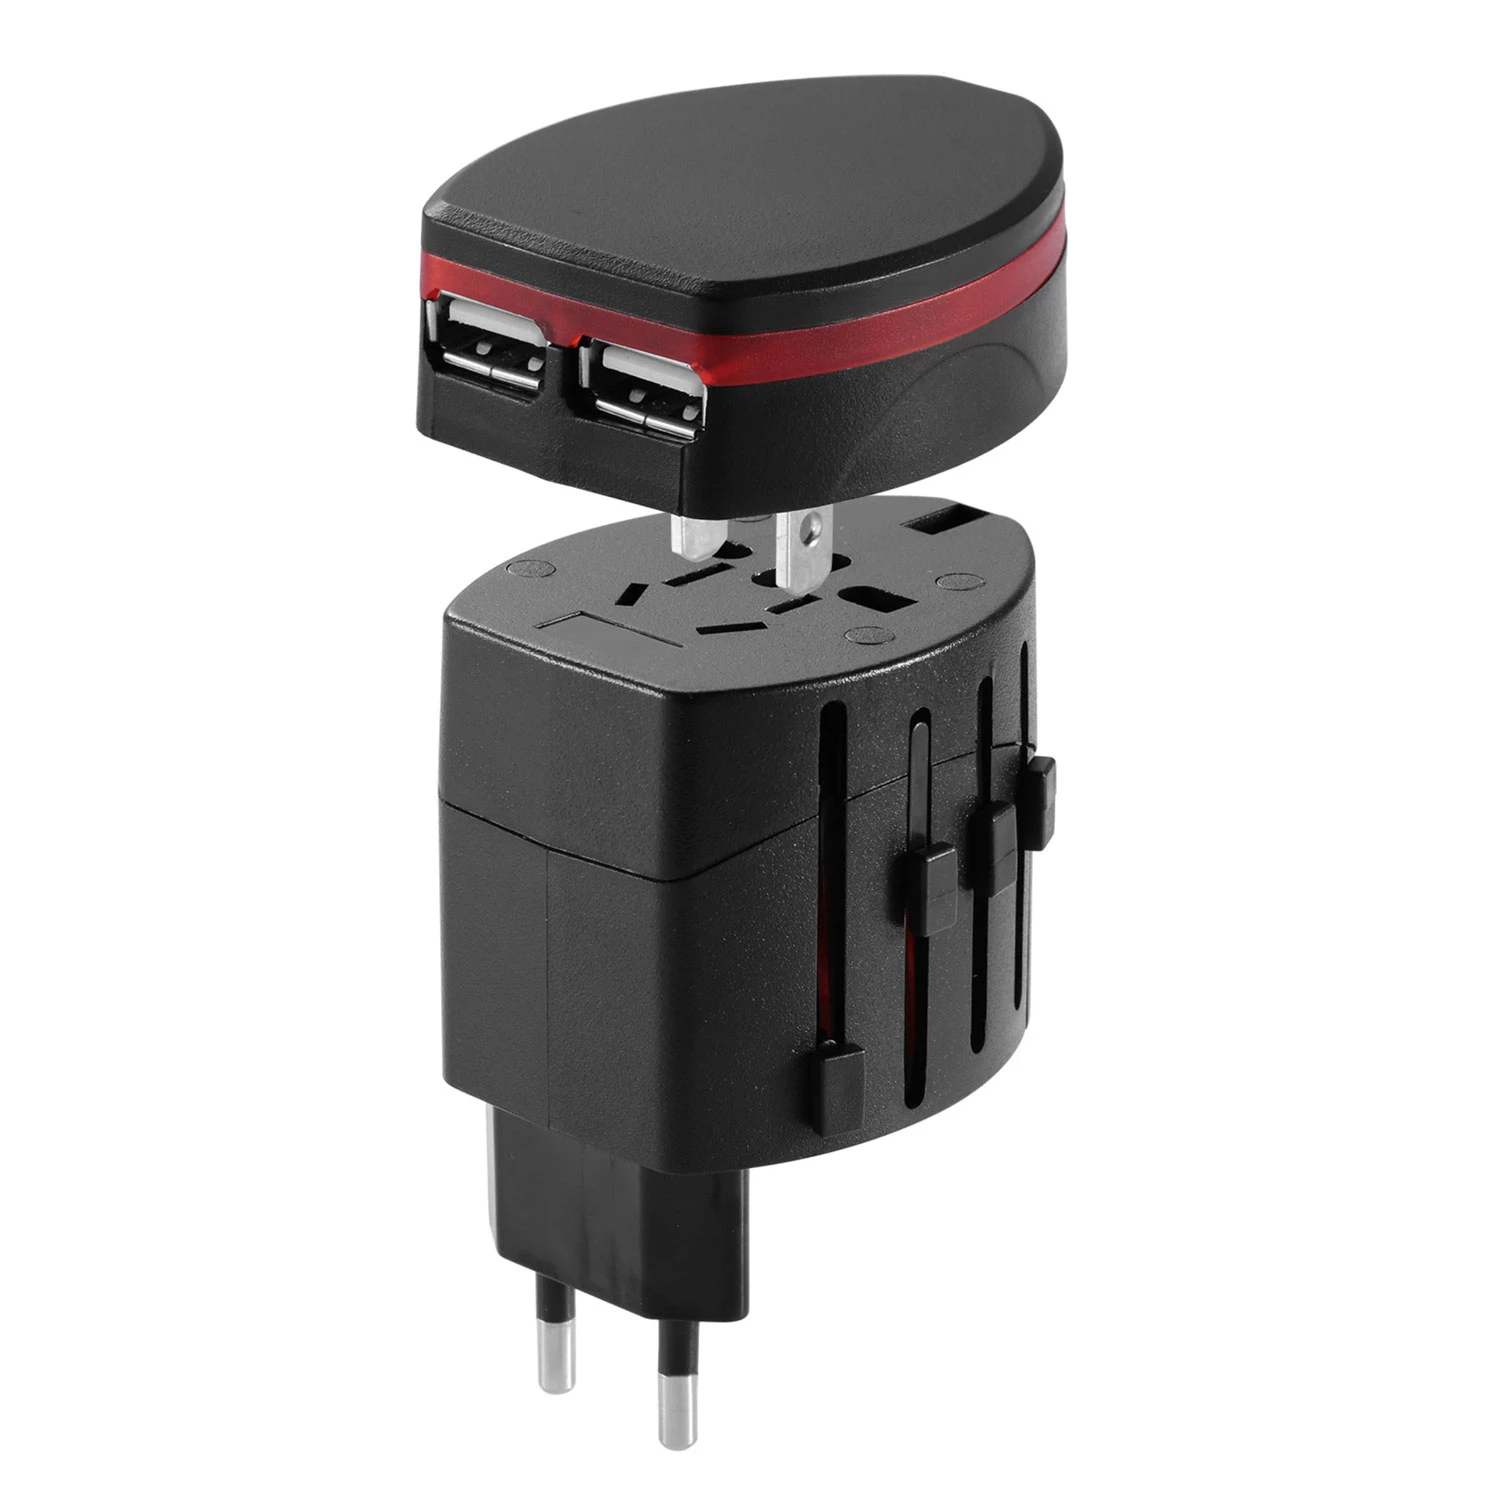 Universal Travel Power Adapter - All-in-One Wall Charger with 2 USB Ports - US UK EU AU Plug